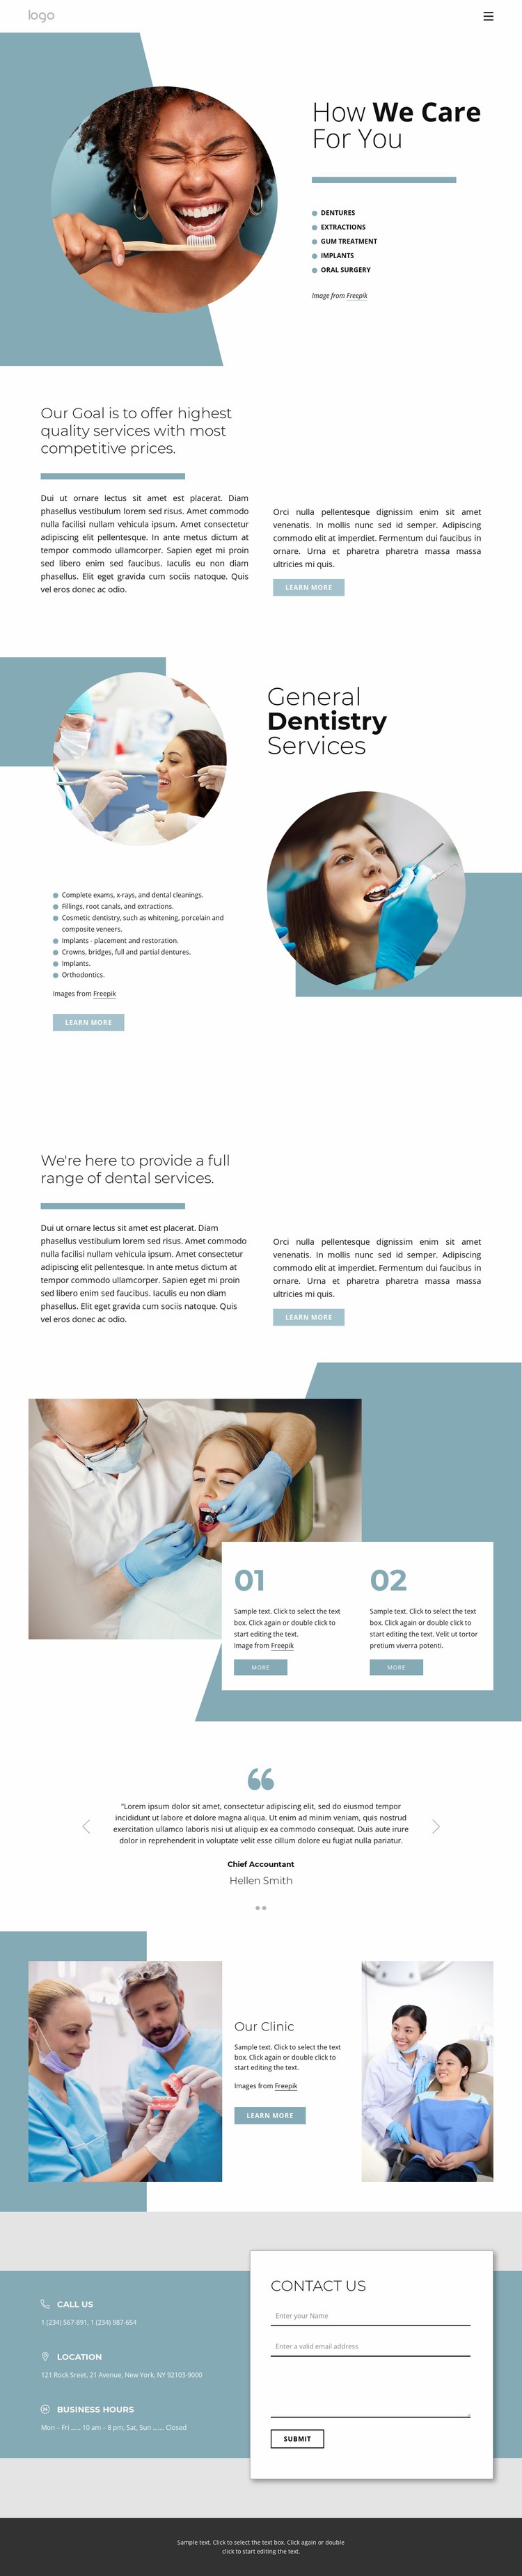 Hight quality dental services Wix Template Alternative